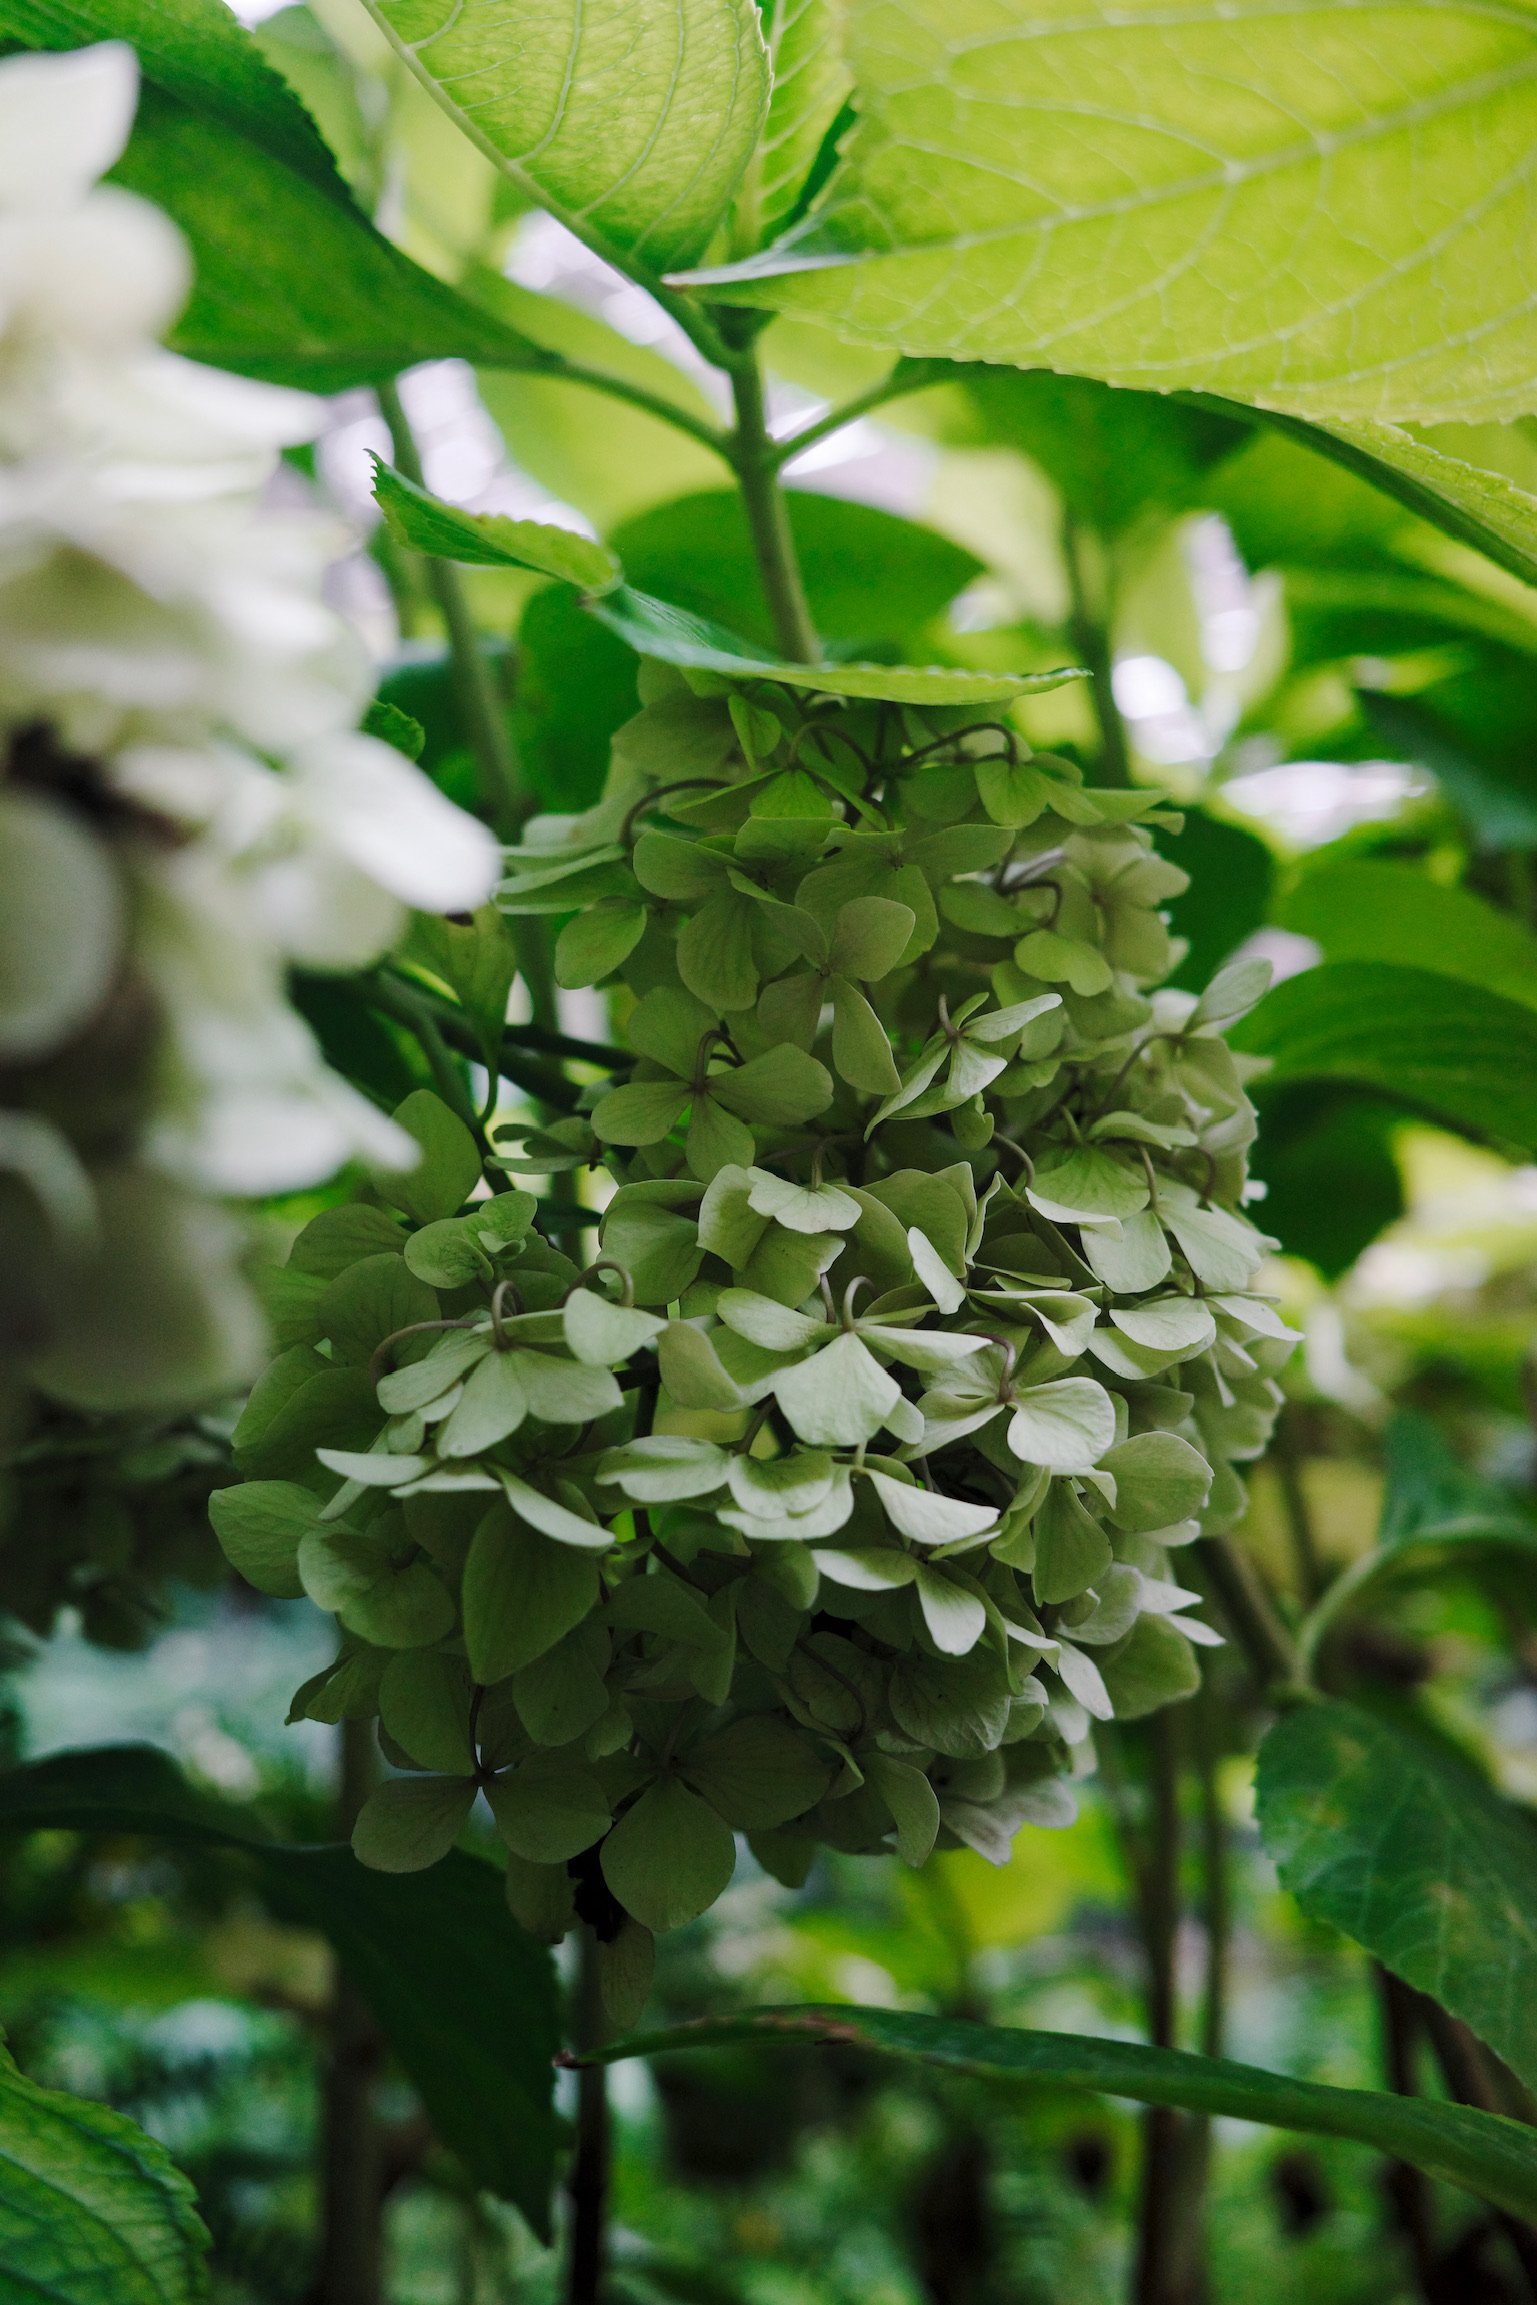 Green Hydrangea flower in focus with a white one out of focus in the foreground.